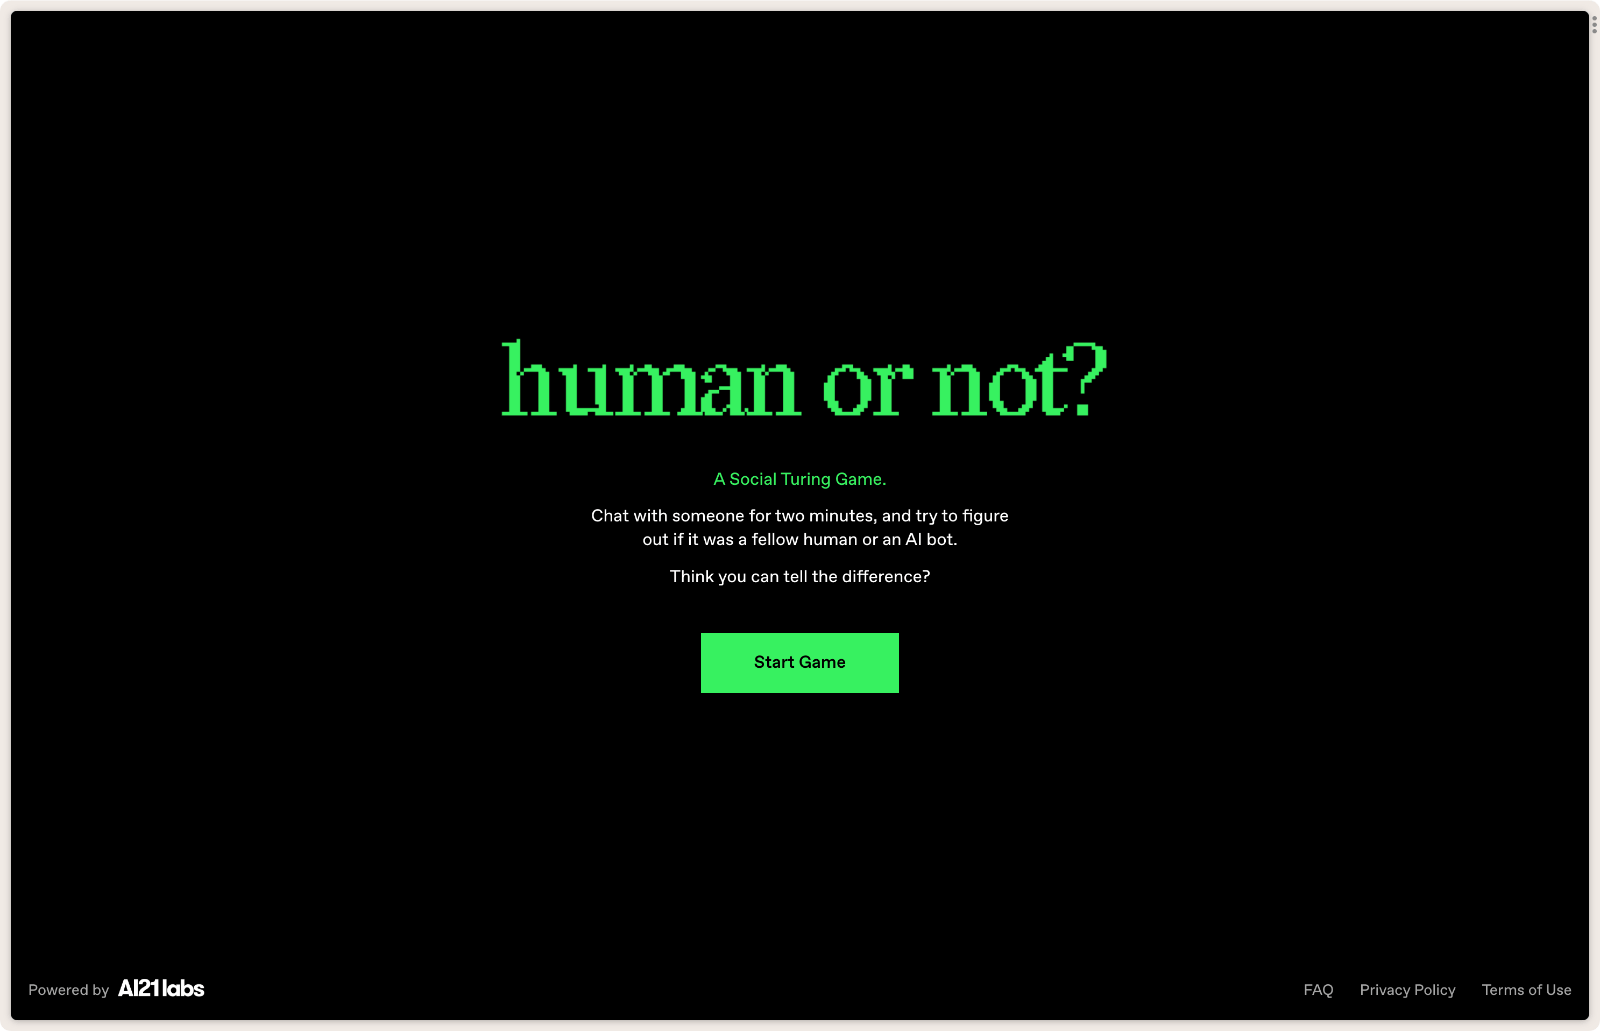 Human or Not 社交图灵游戏